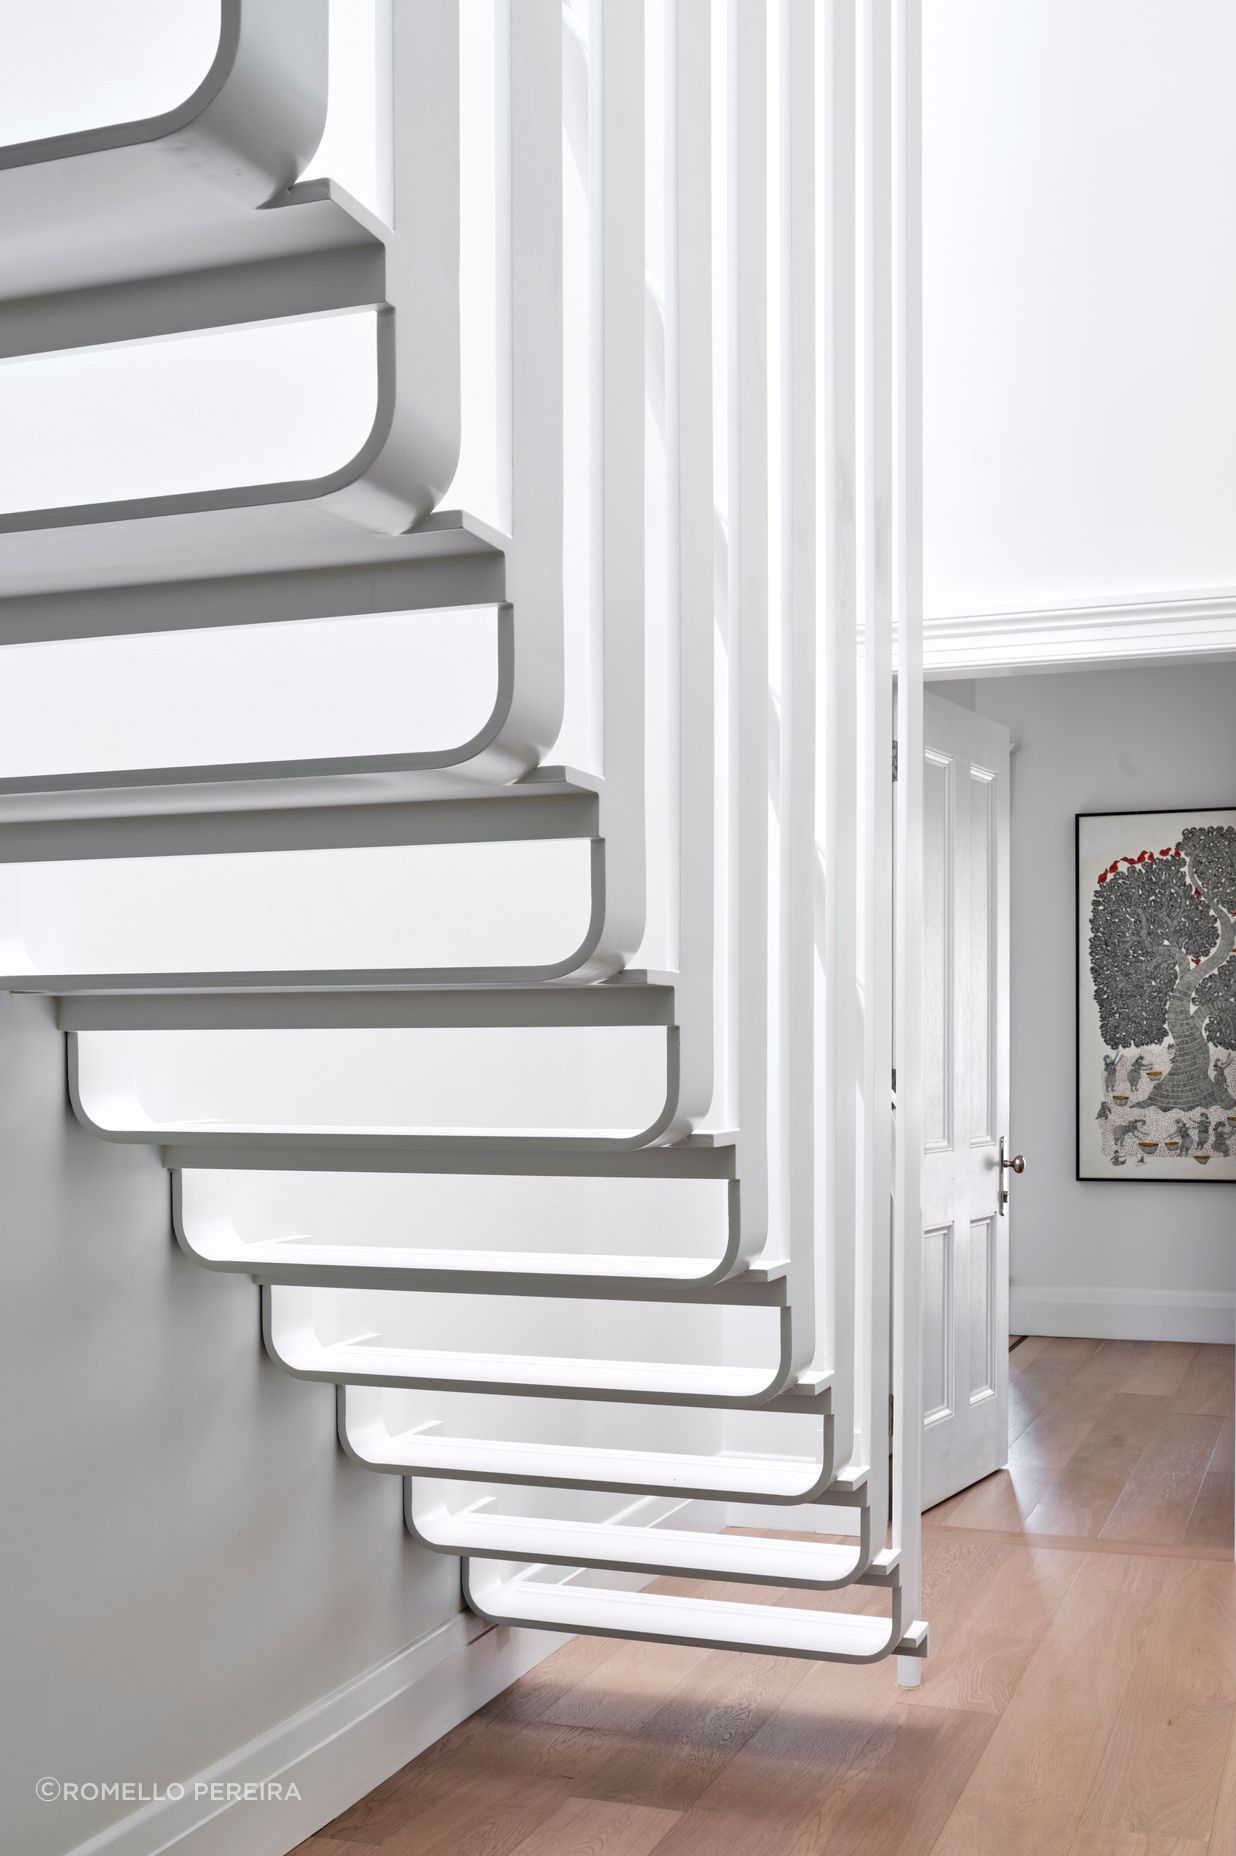 The upstairs mezzanine is accessed by sculptural stairs, celebrating the contrast of traditional and contemporary.